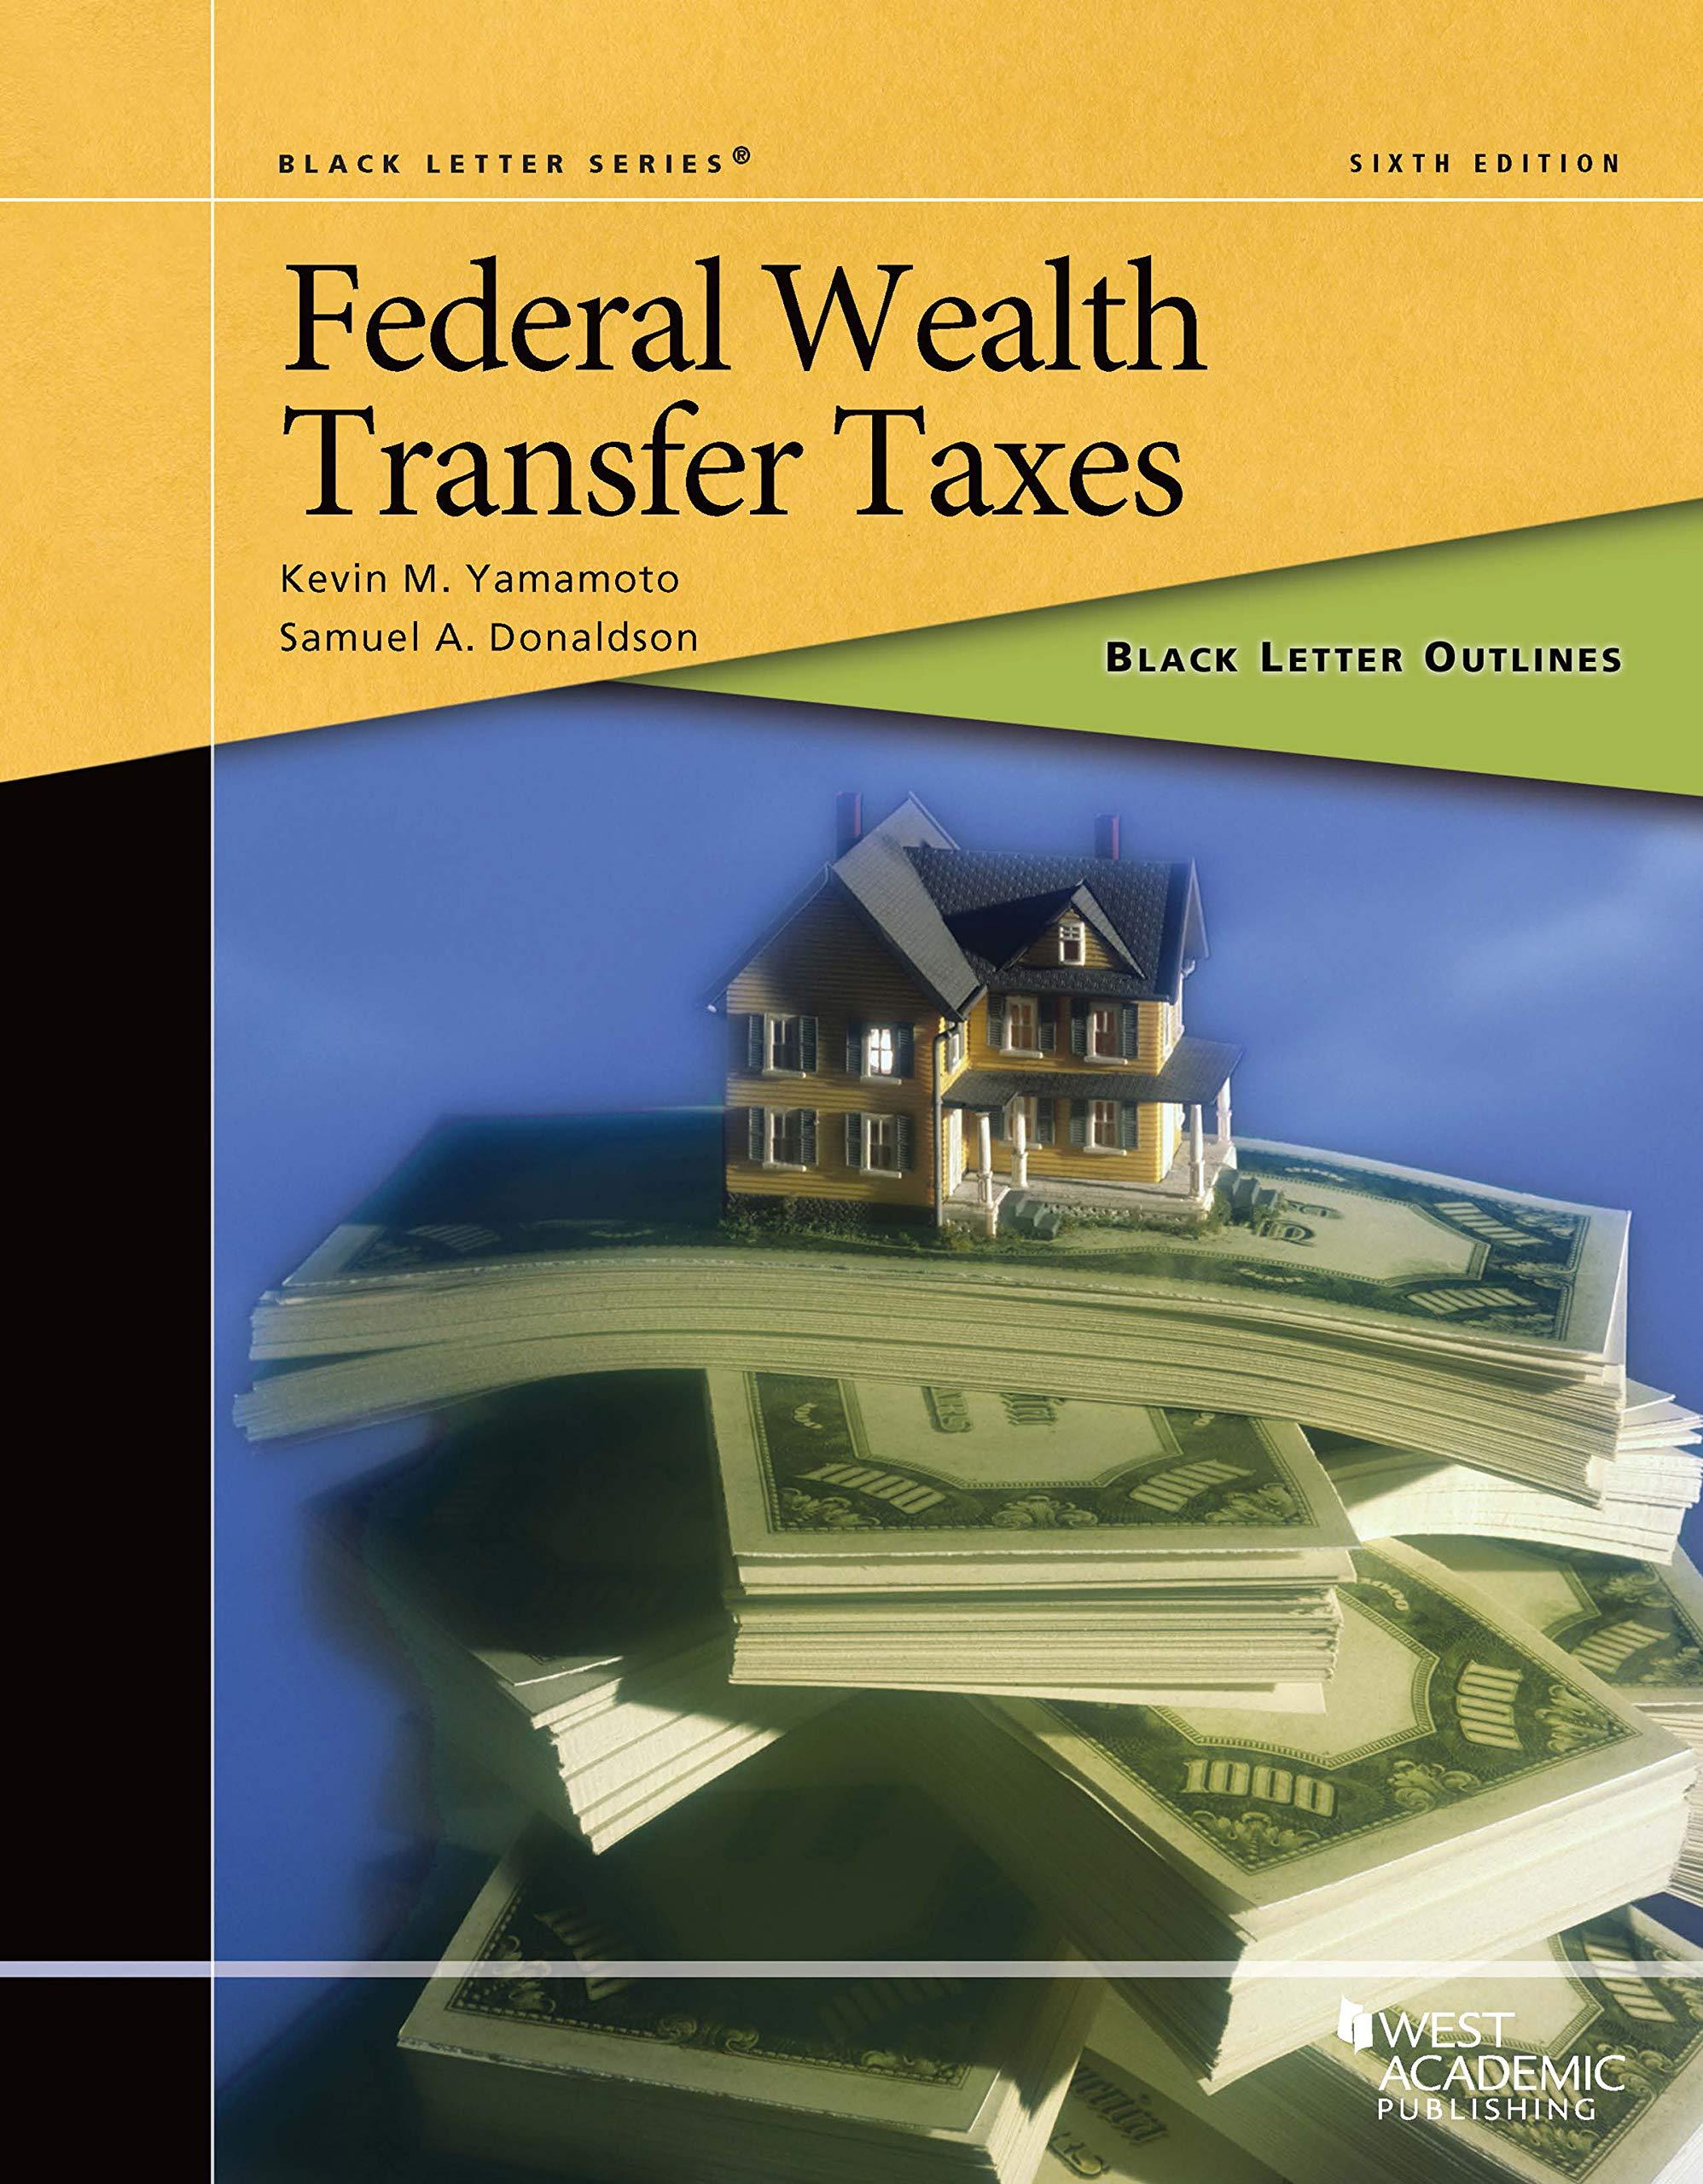 federal wealth transfer taxes 6th edition kevin yamamoto, samuel donaldson 164708282x, 9781647082826